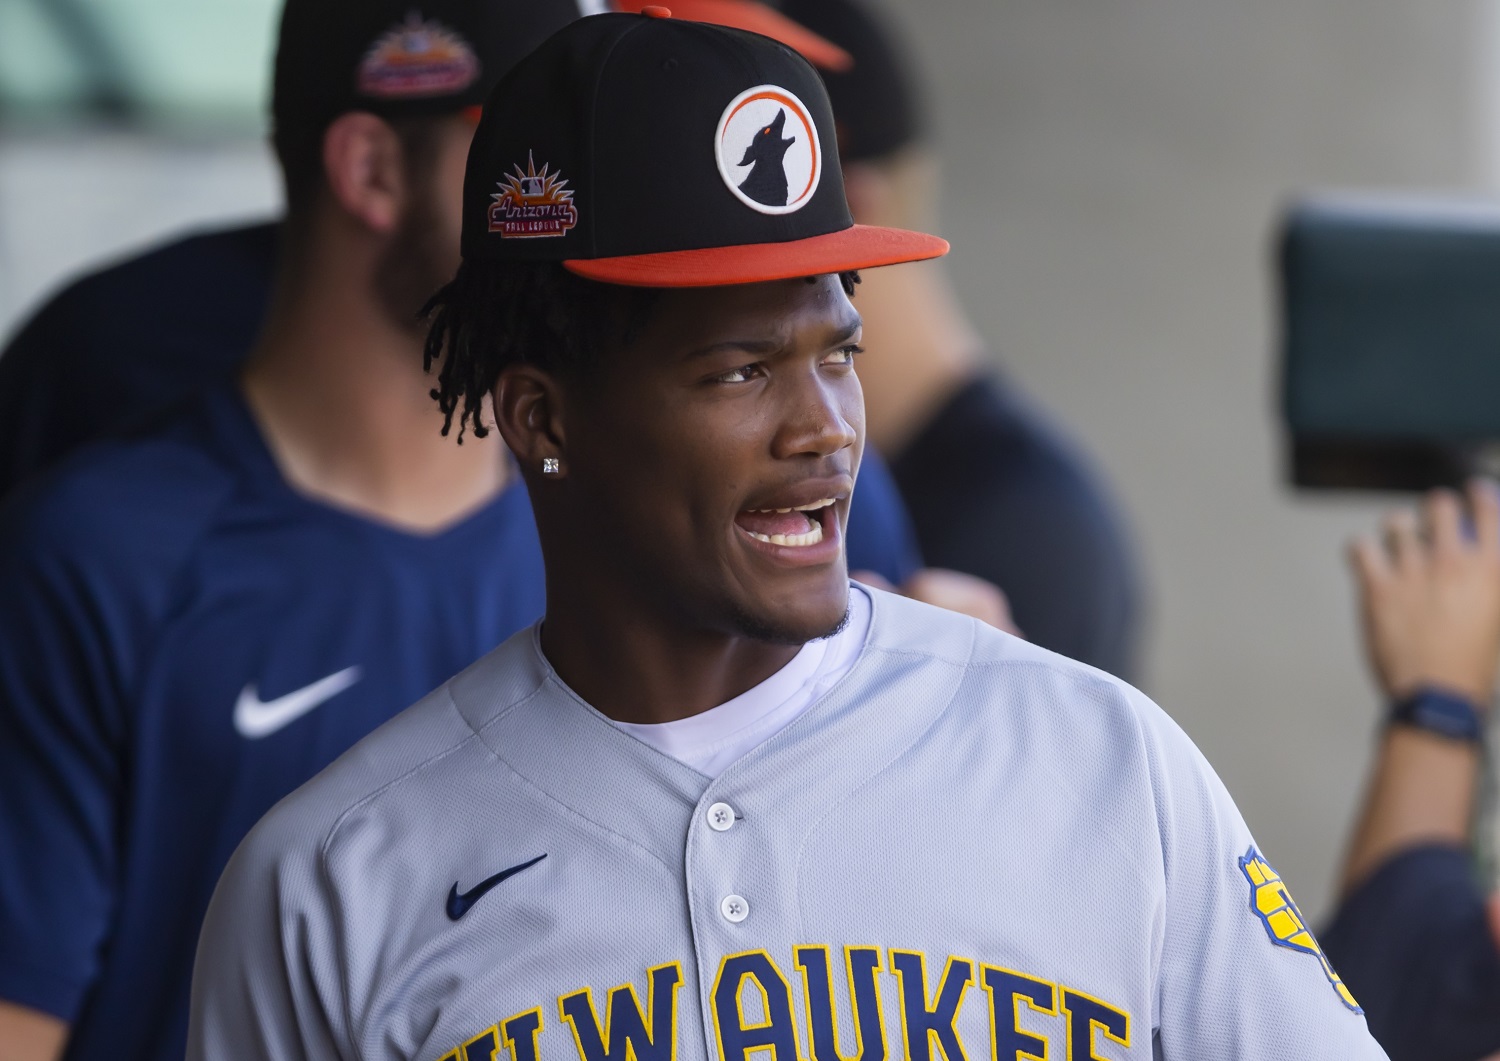 Brewers pitching prospect Abner Uribe turning heads with 103 mph heat